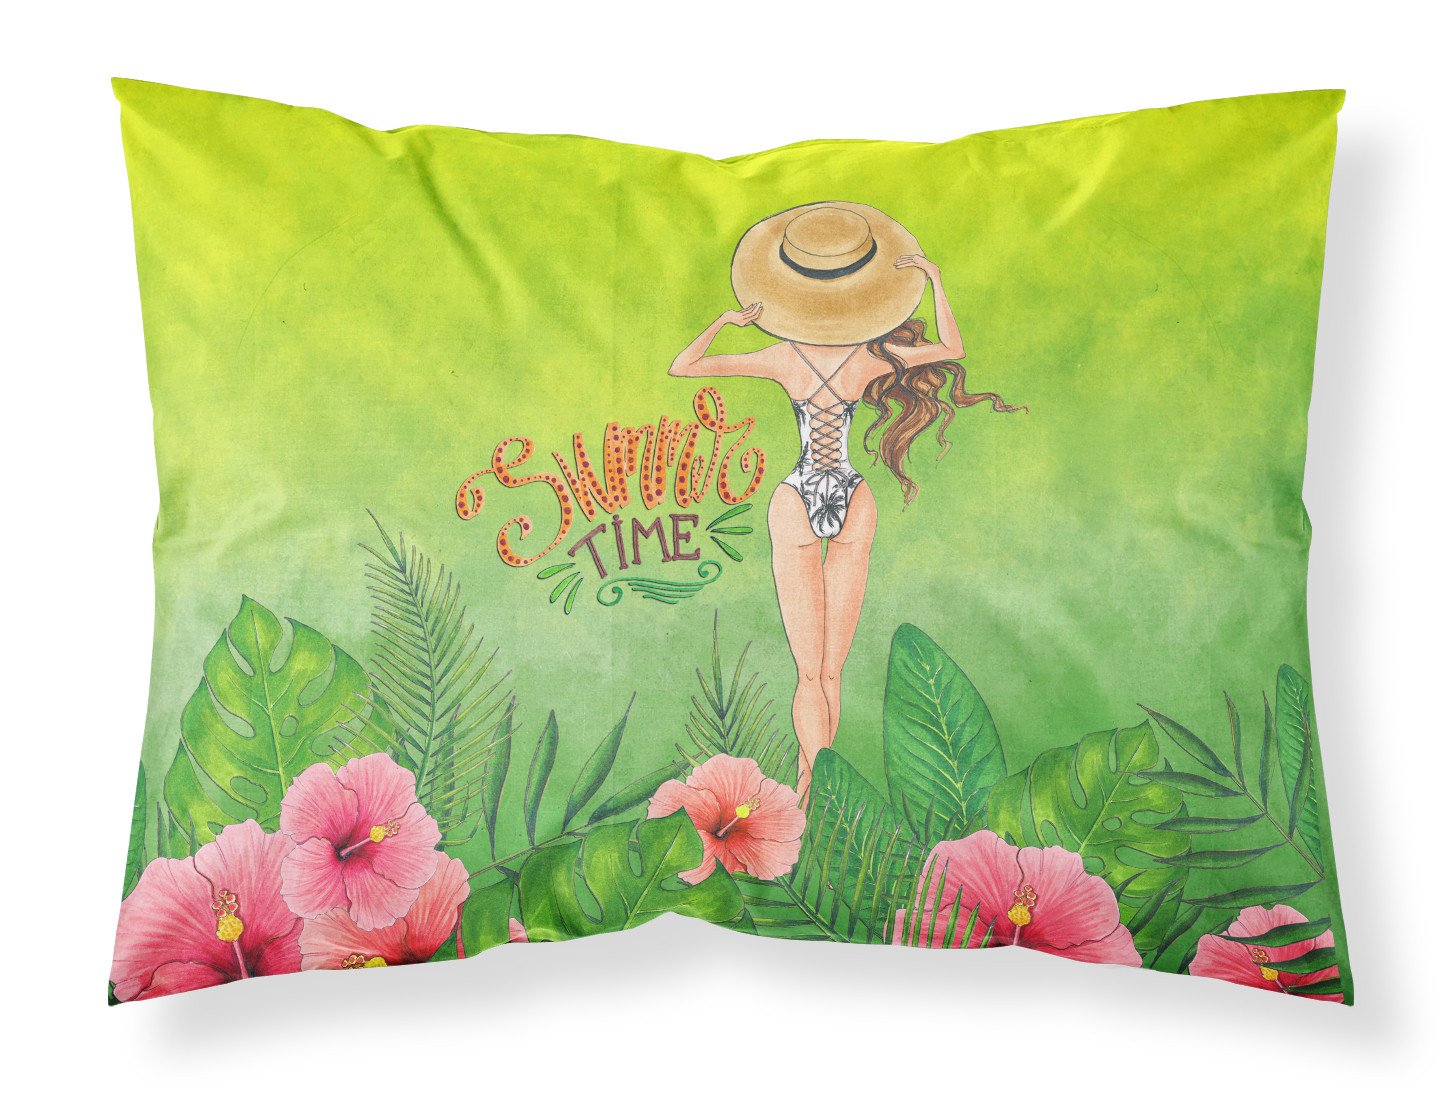 Summer Time Lady in Swimsuit Fabric Standard Pillowcase BB7455PILLOWCASE by Caroline's Treasures